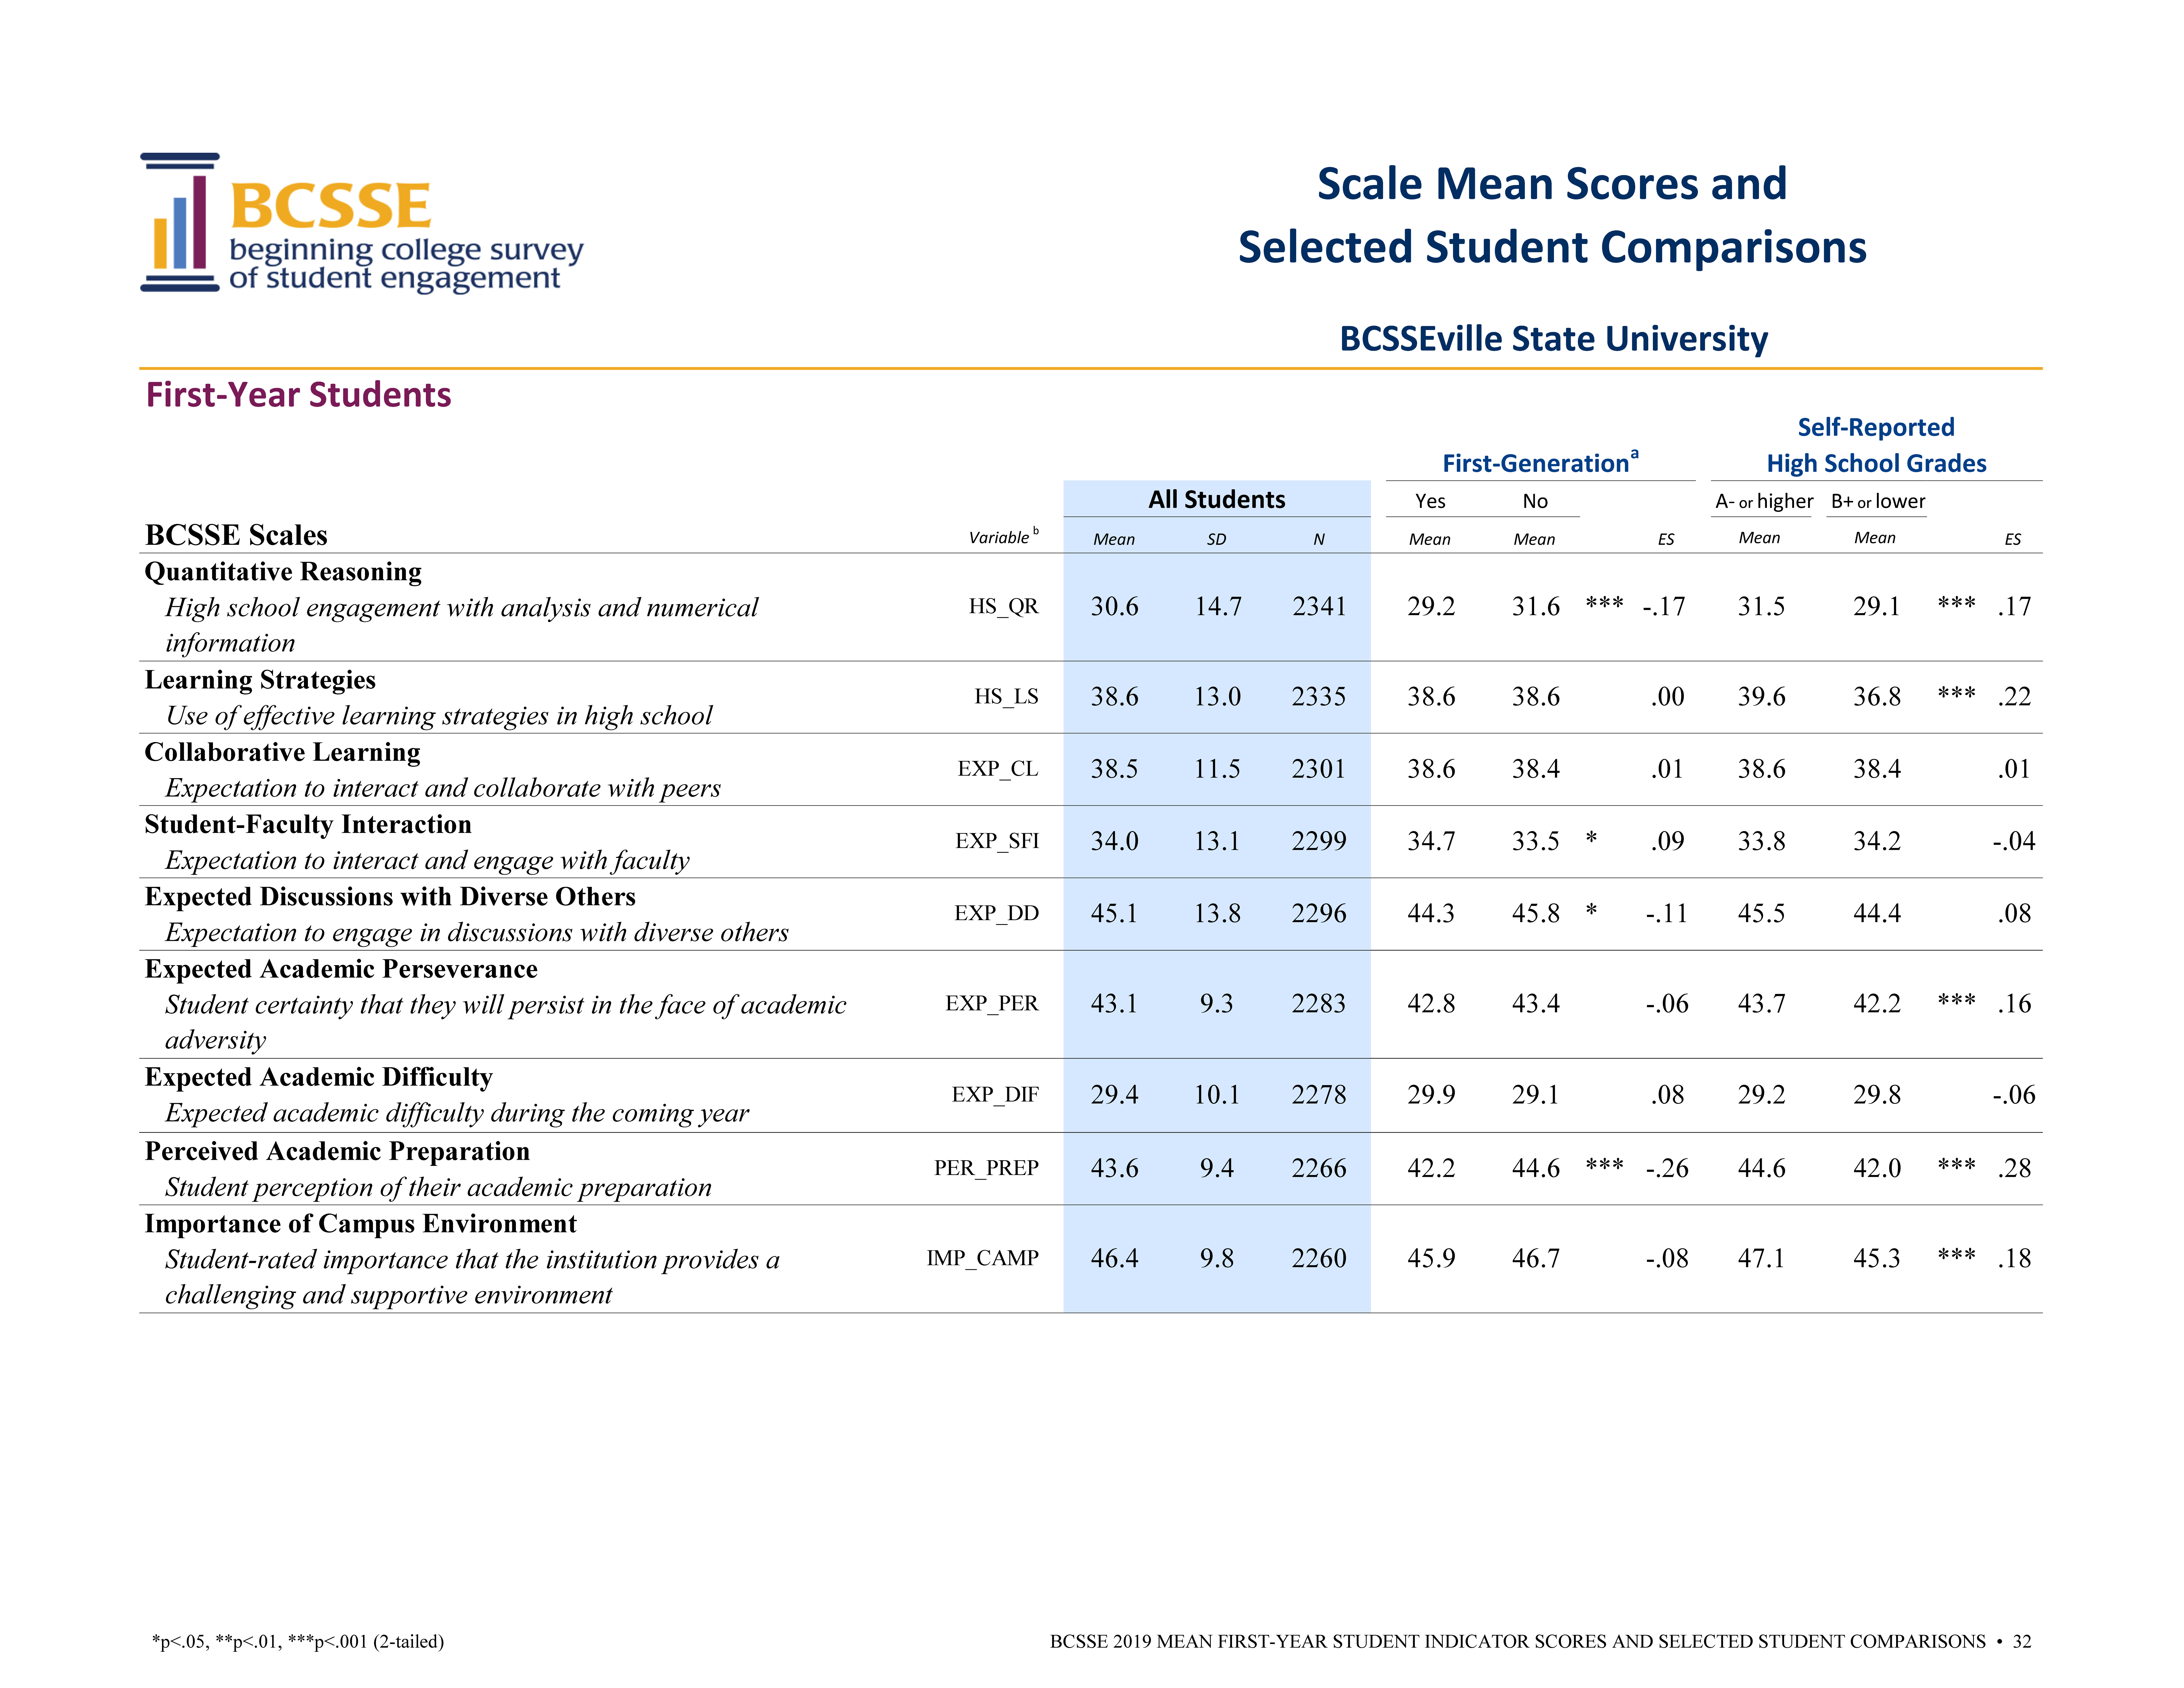 BCSSE Institutional Report example for First-Year Students